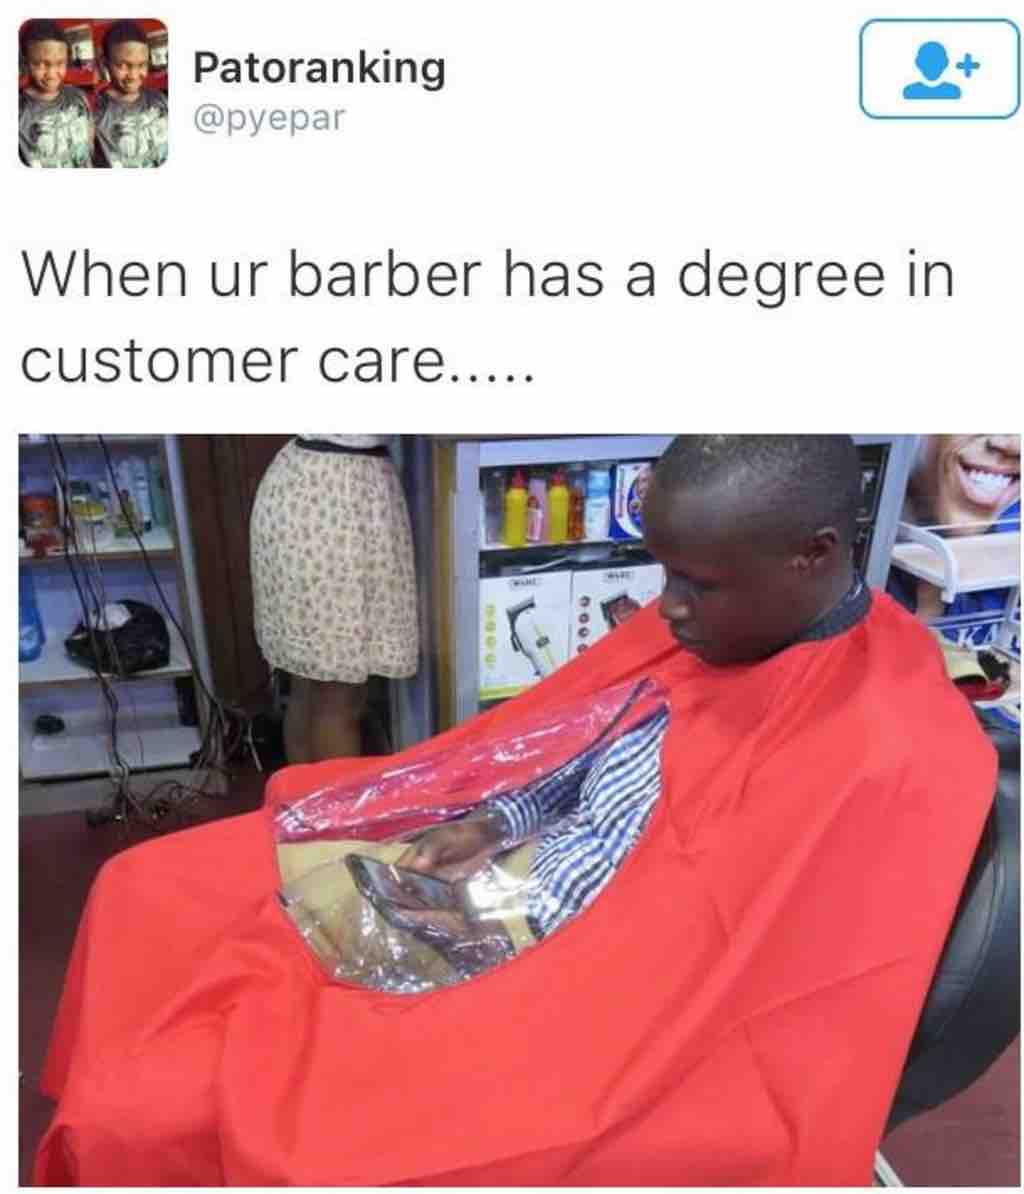 The finest barber service in the land.